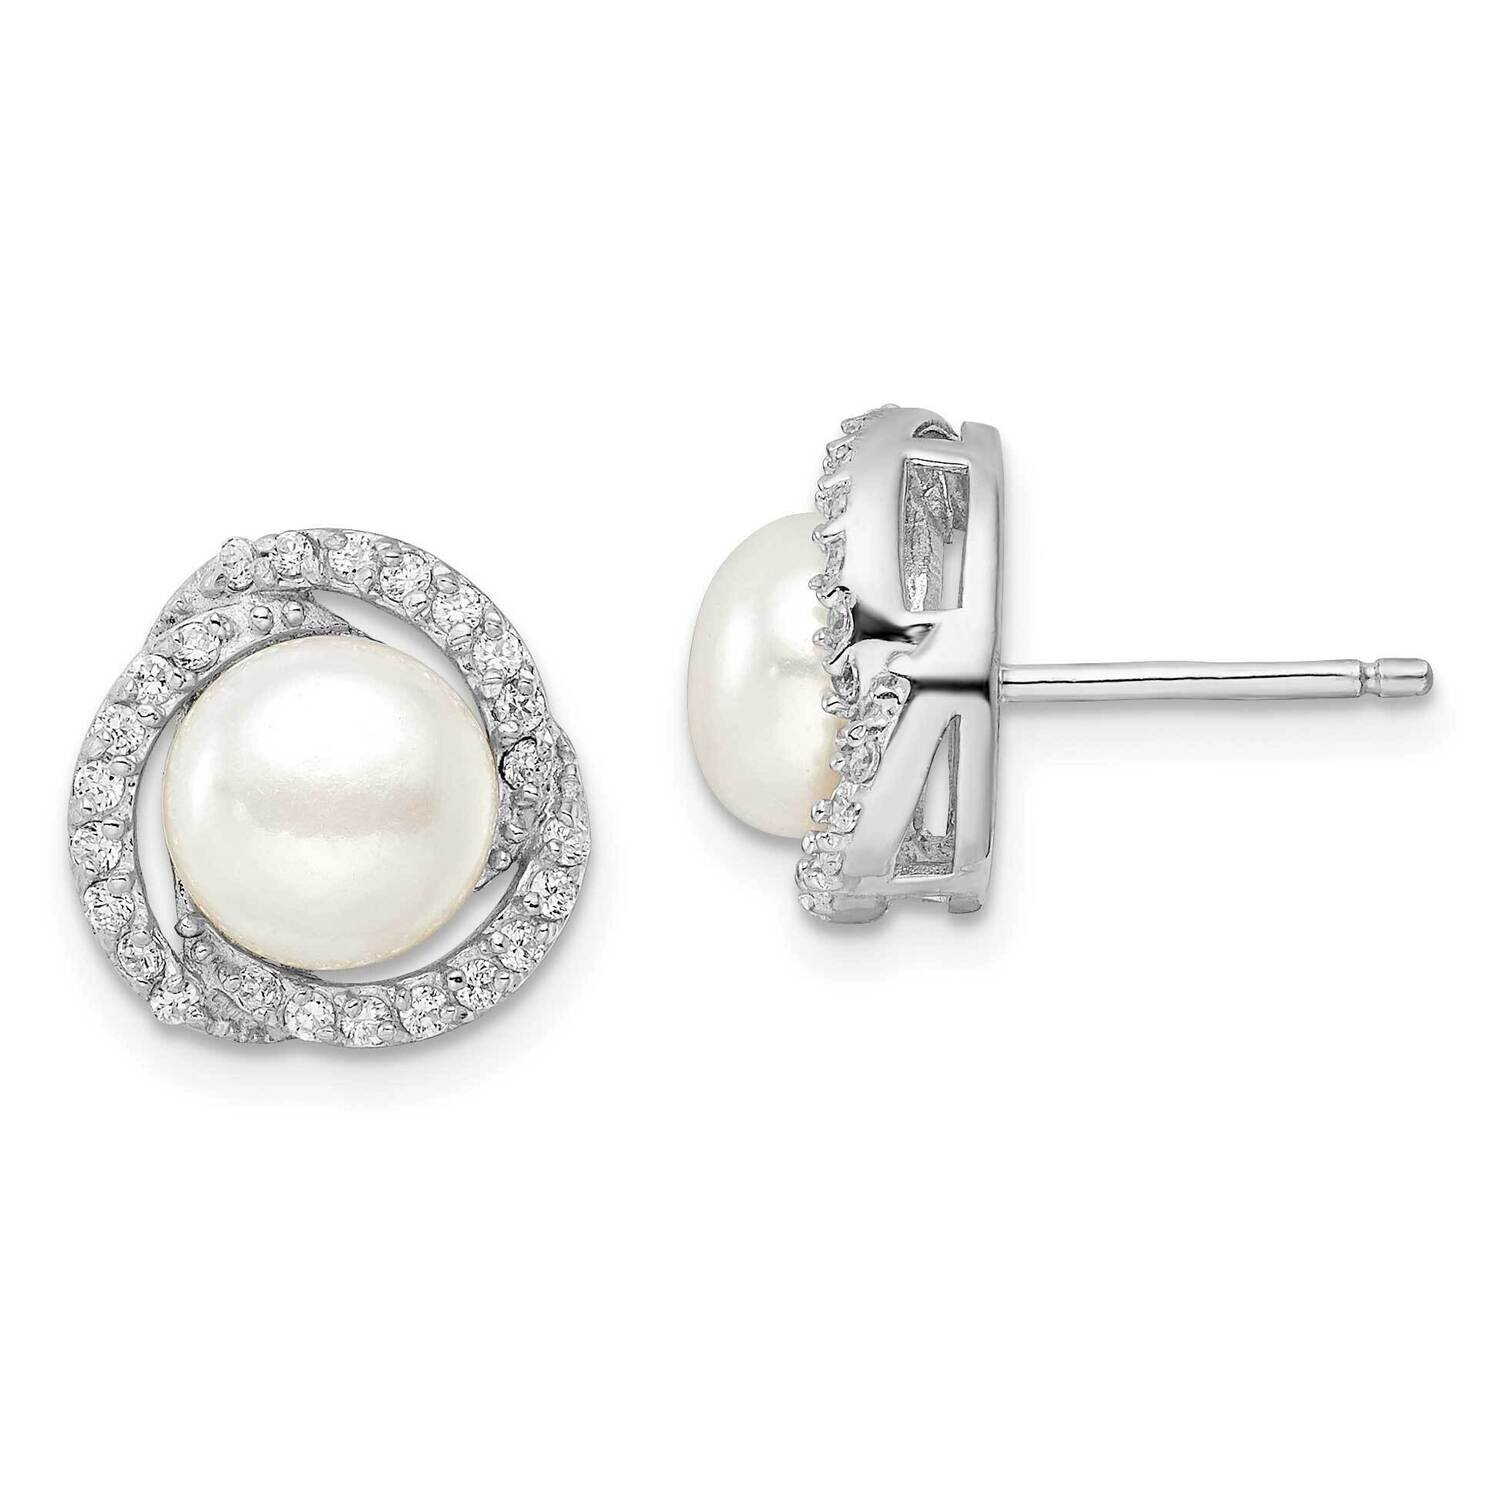 Cheryl M White Fw Cultured Pearl CZ Diamond Love Knot Earrings Sterling Silver Rhodium-plated QCM1473